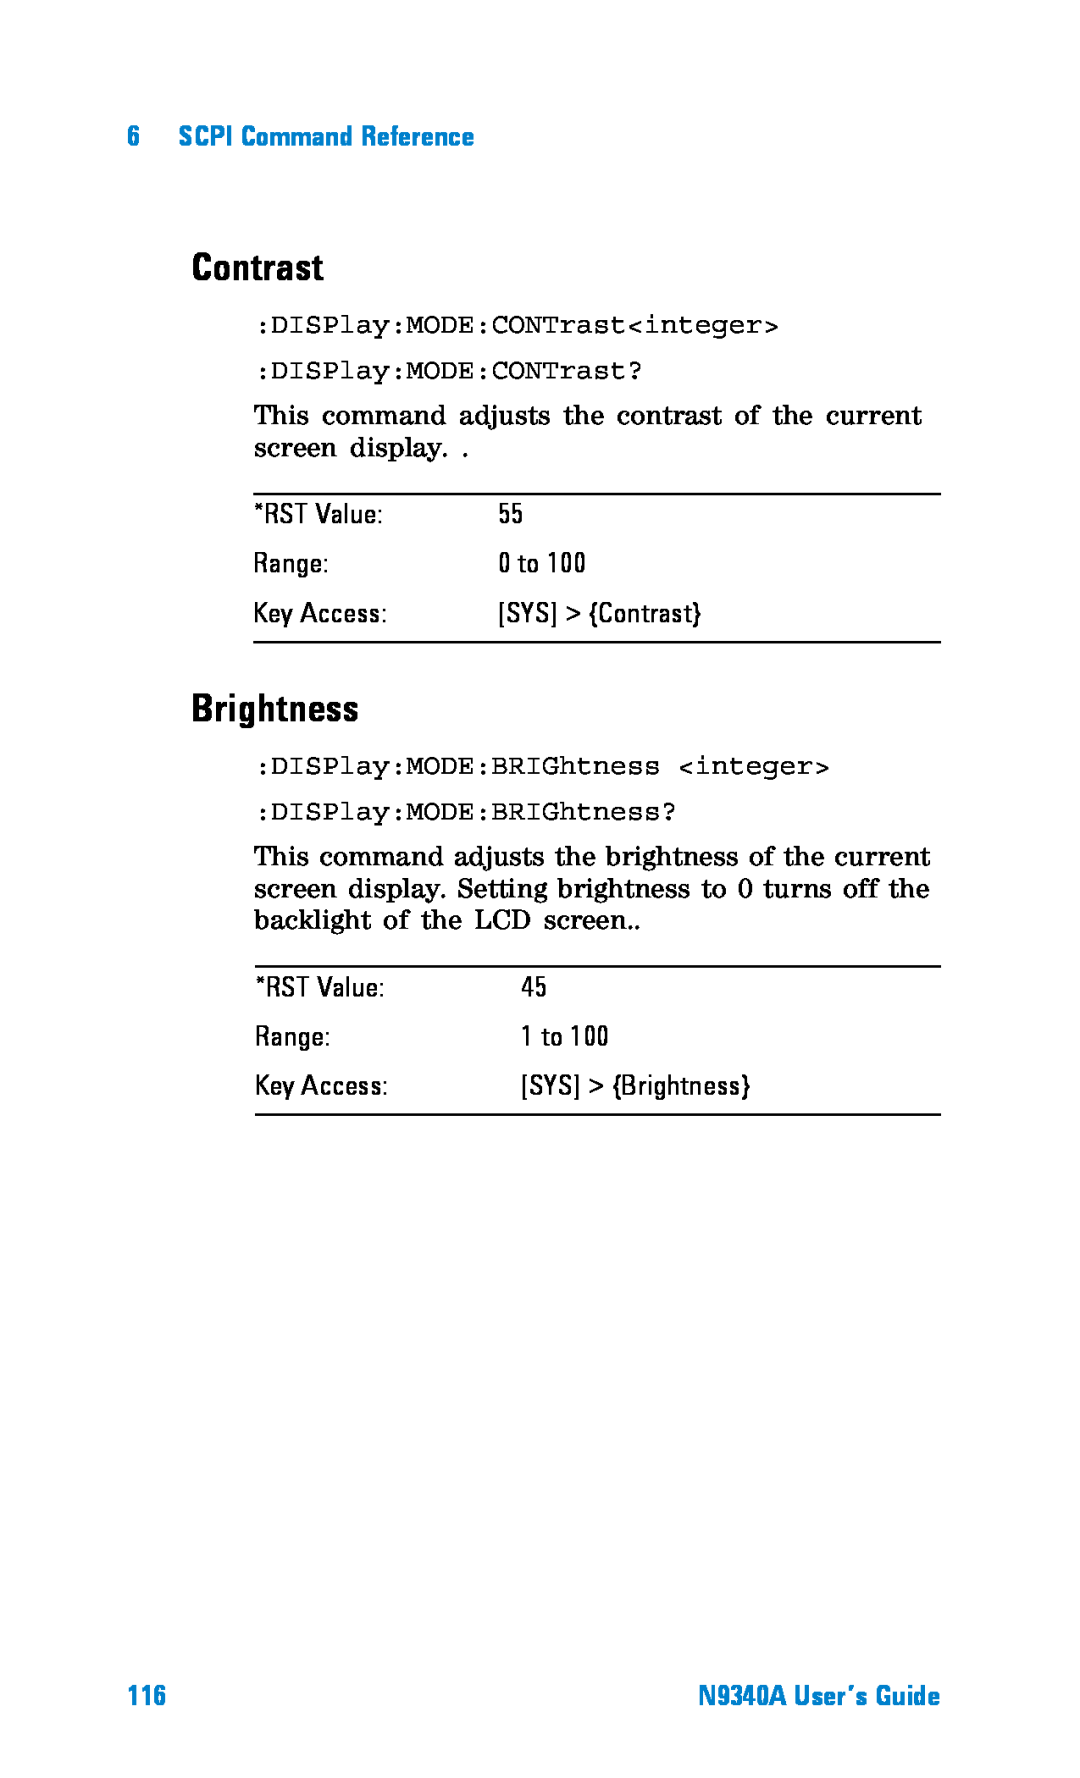 Agilent Technologies N9340A manual Contrast, Brightness, SCPI Command Reference 